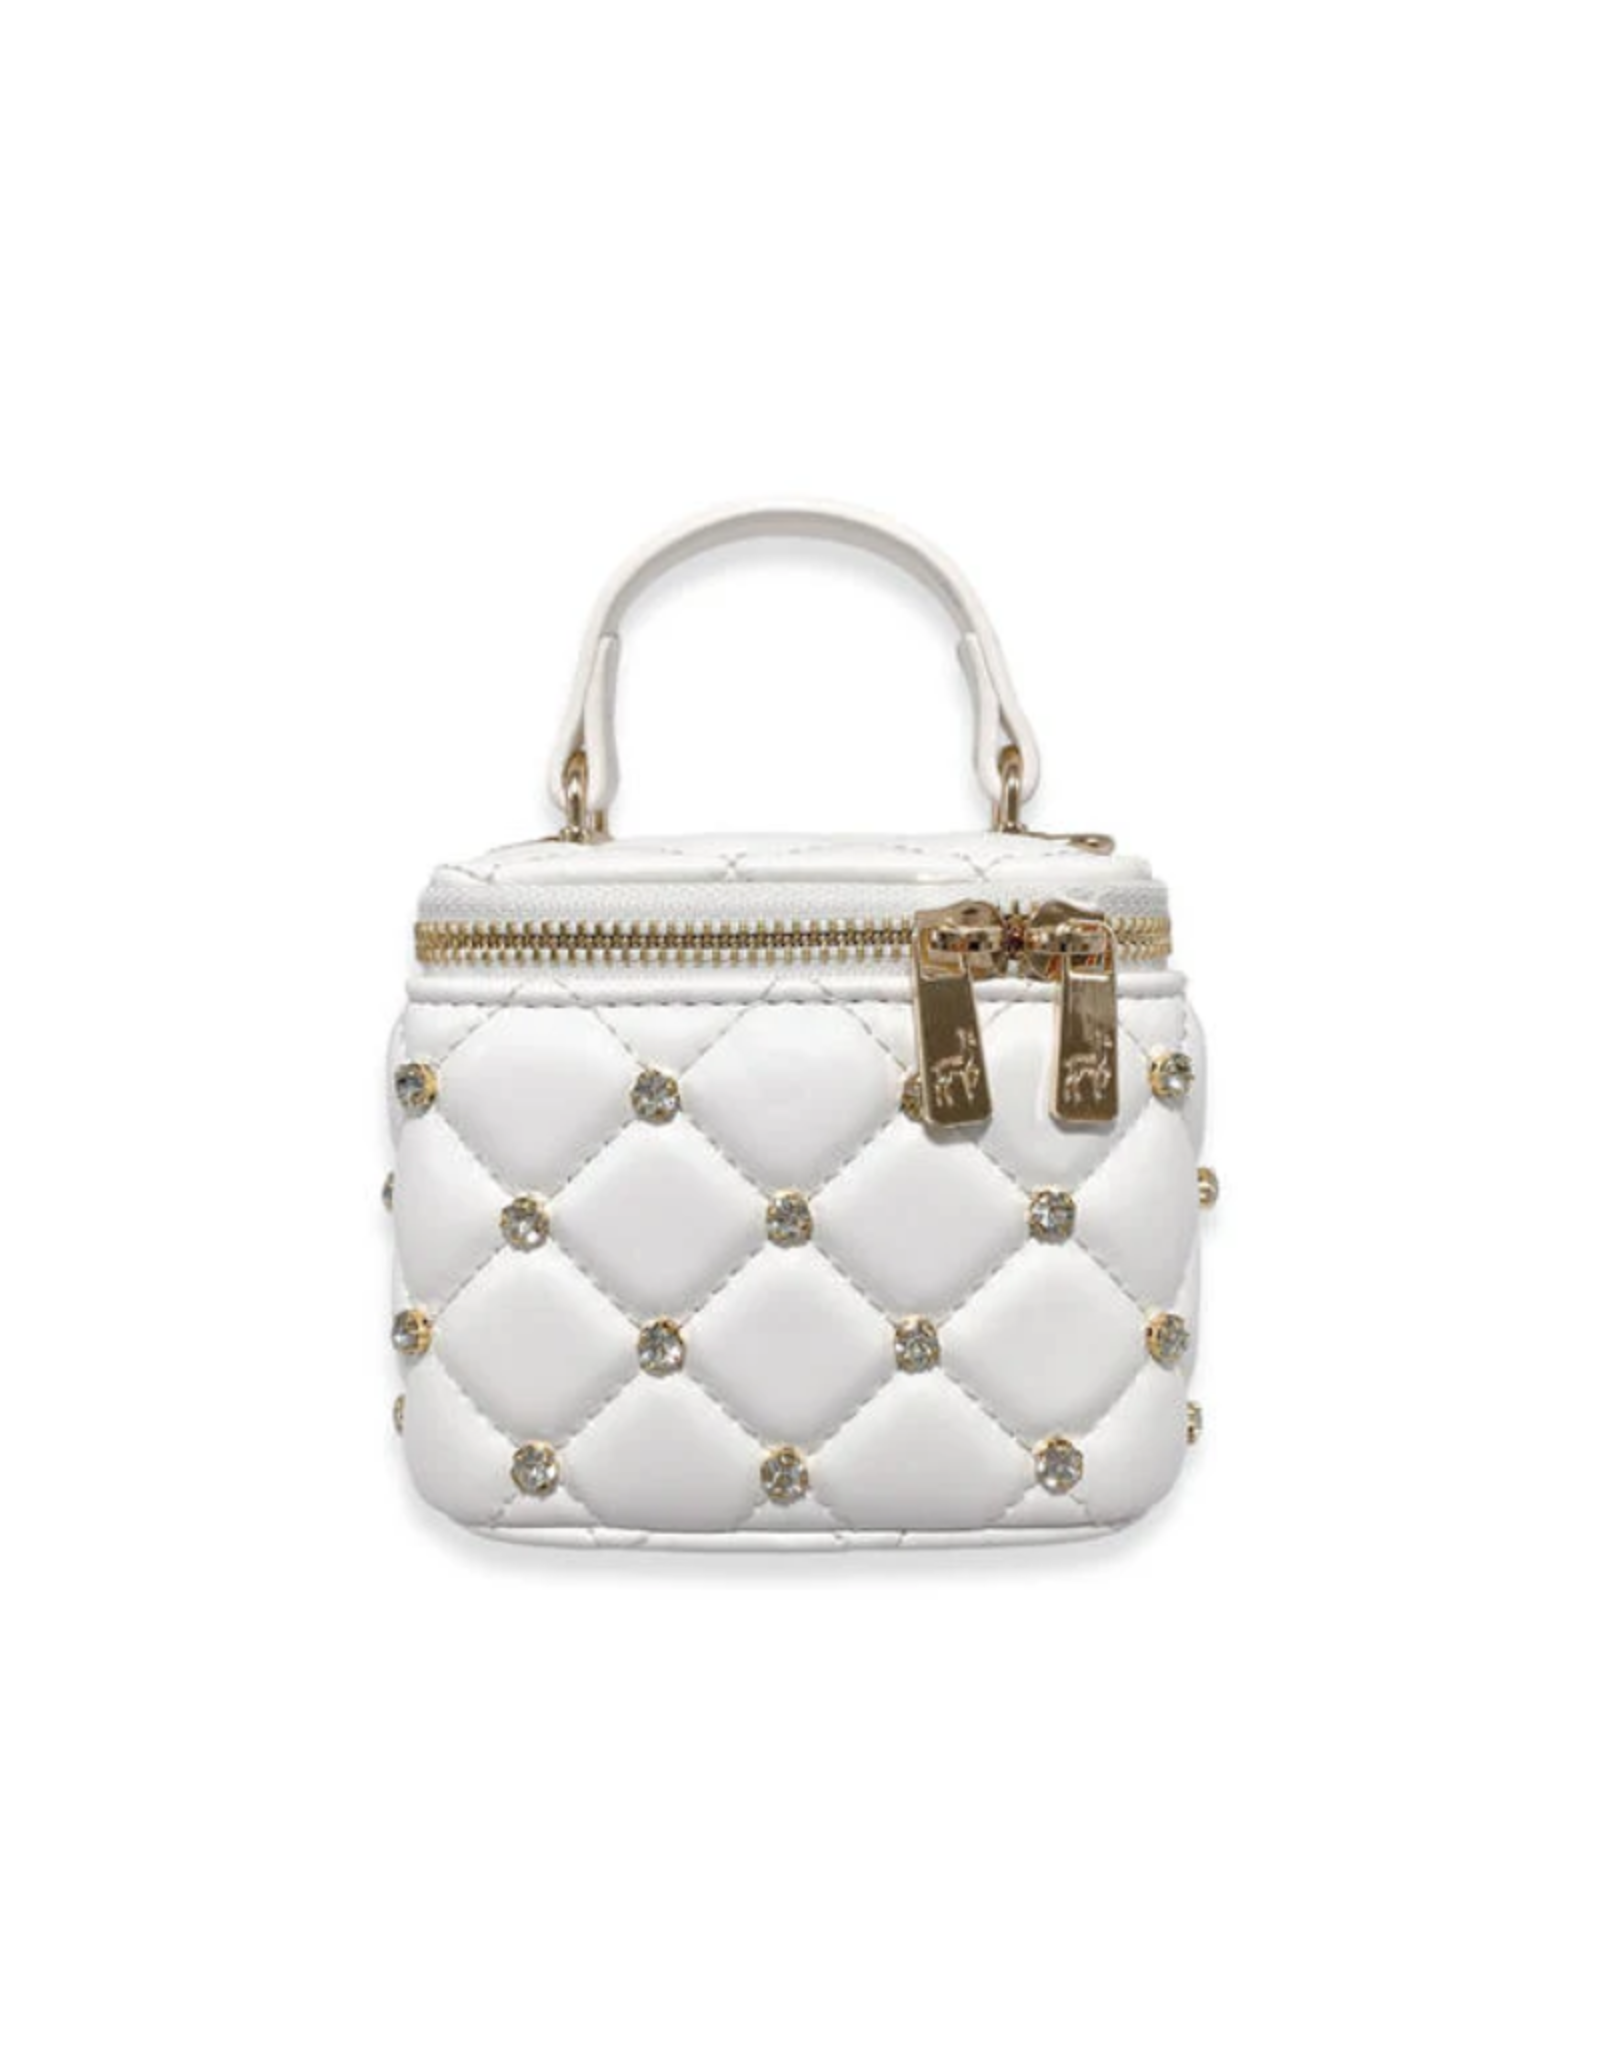 Embellished Vanity Quilted Purse, White